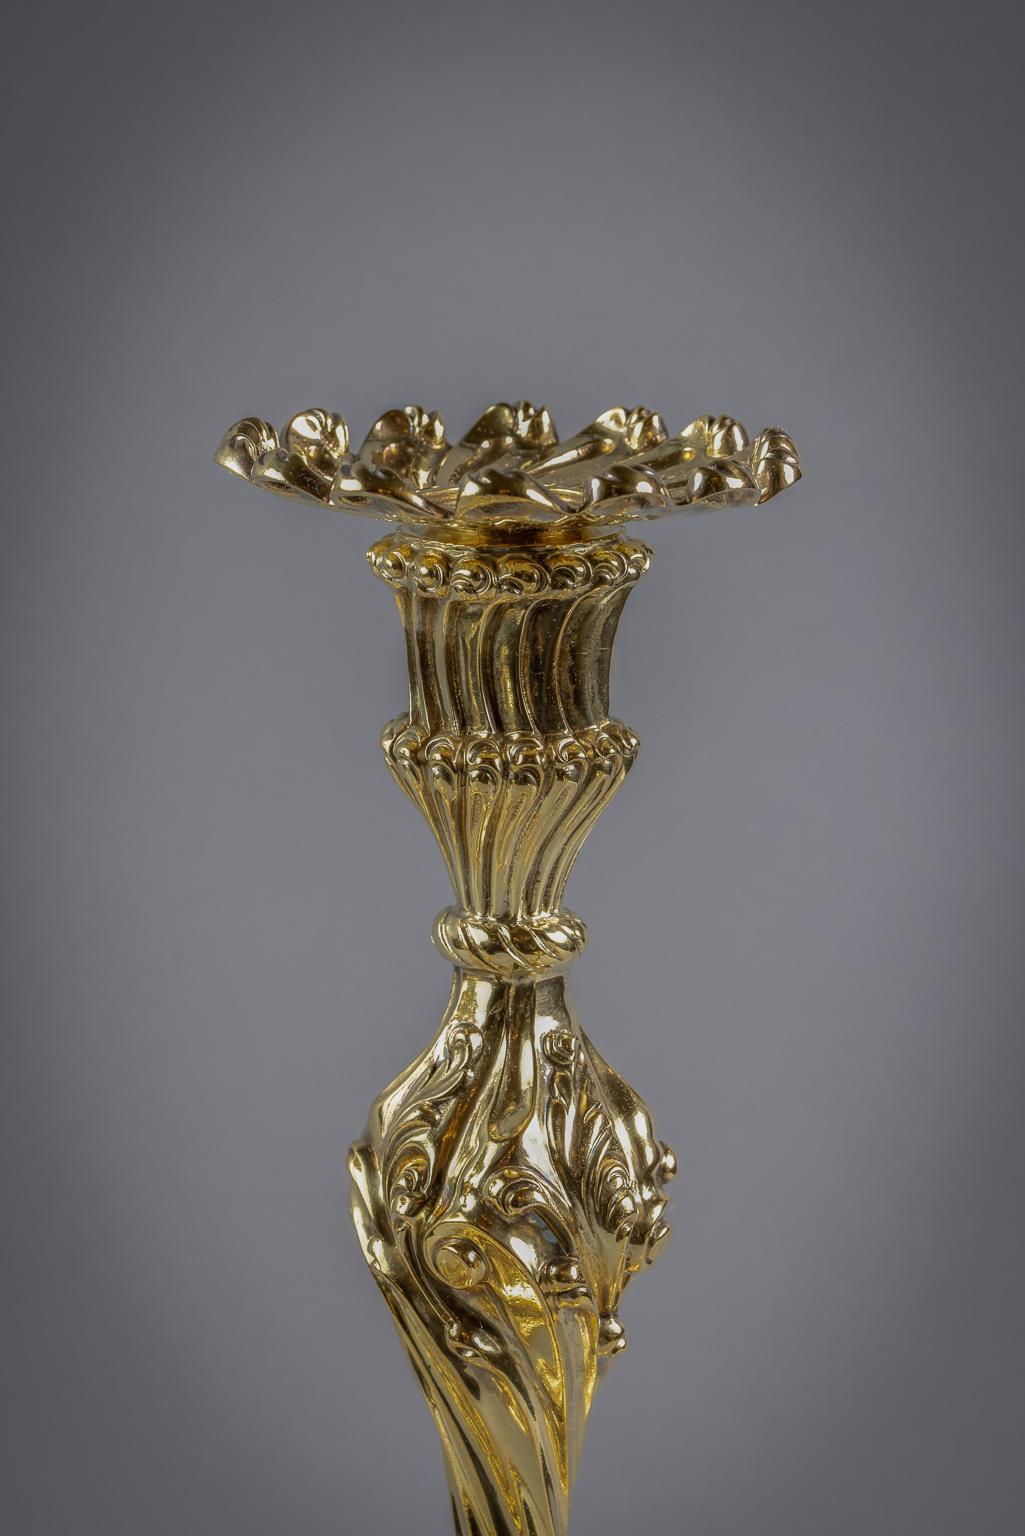 In the Rococo style, cast and chased with foliate scrolls, rising to a knopped twisting baluster stem with shaped twisting socket and removable drip-pan chased with ovolo and flutes. Marked: Howard and Co., New York, 1898.